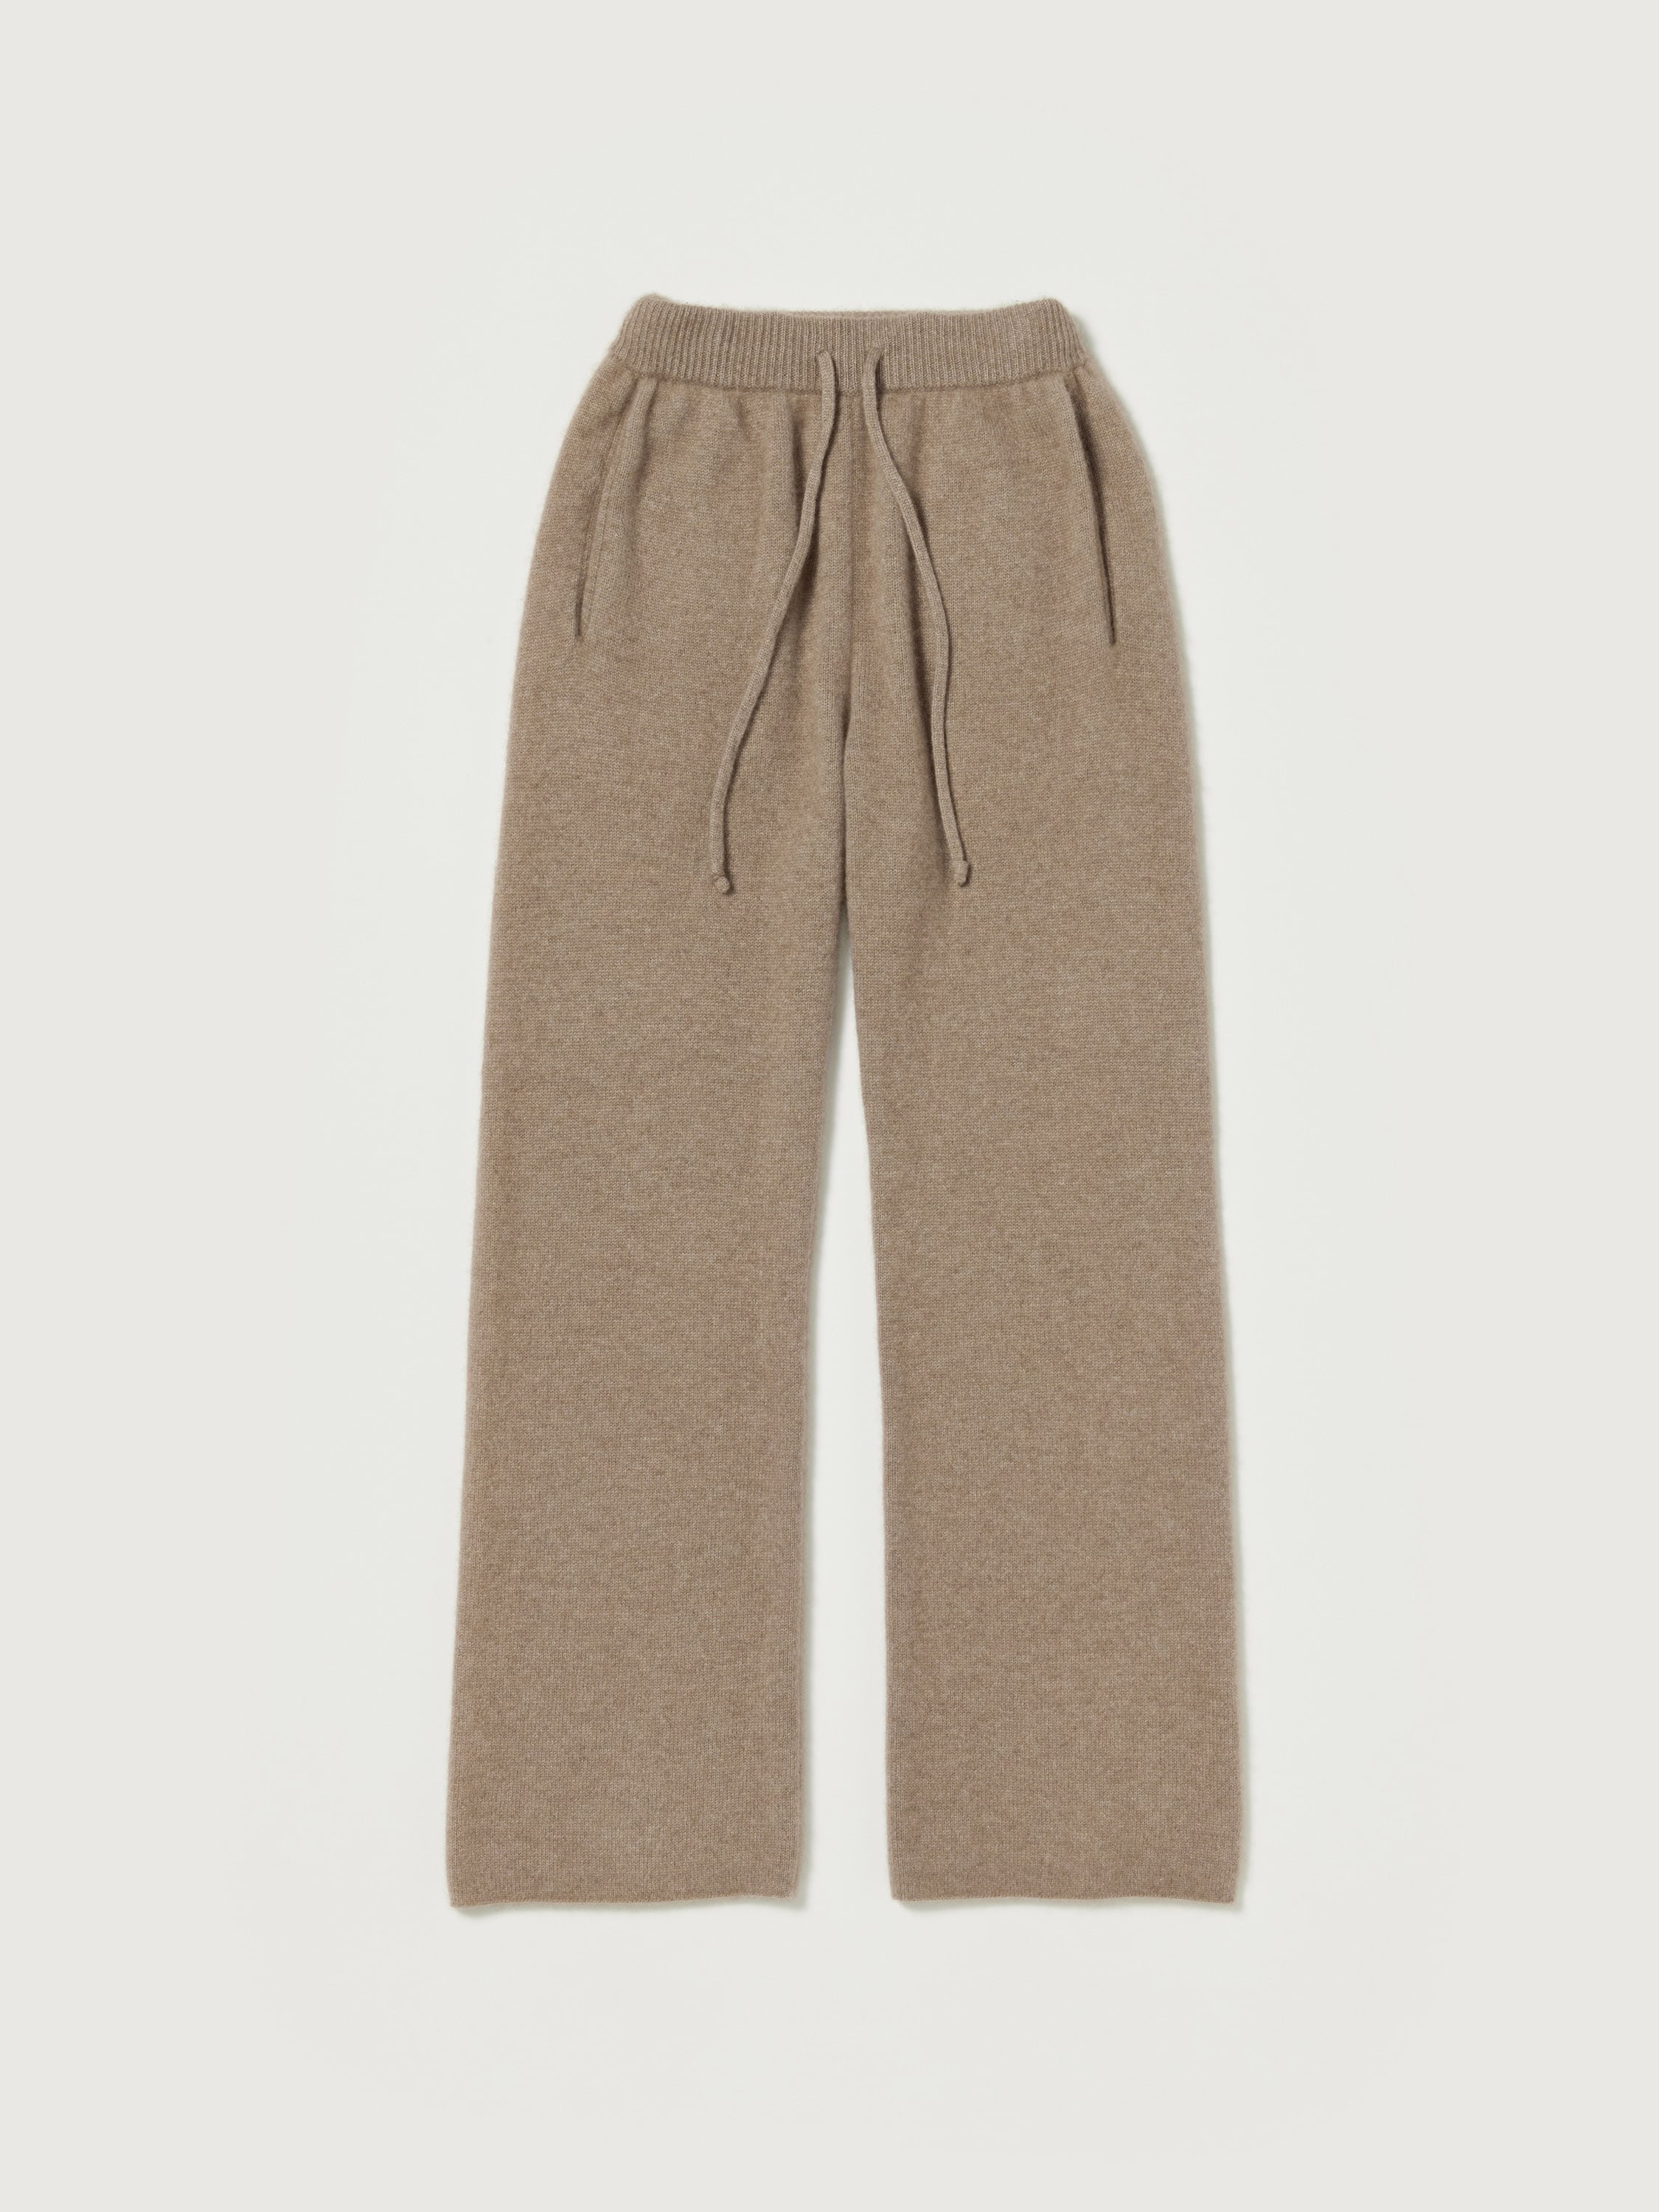 BABY CASHMERE KNIT PANTS 詳細画像 NATURAL BROWN 5